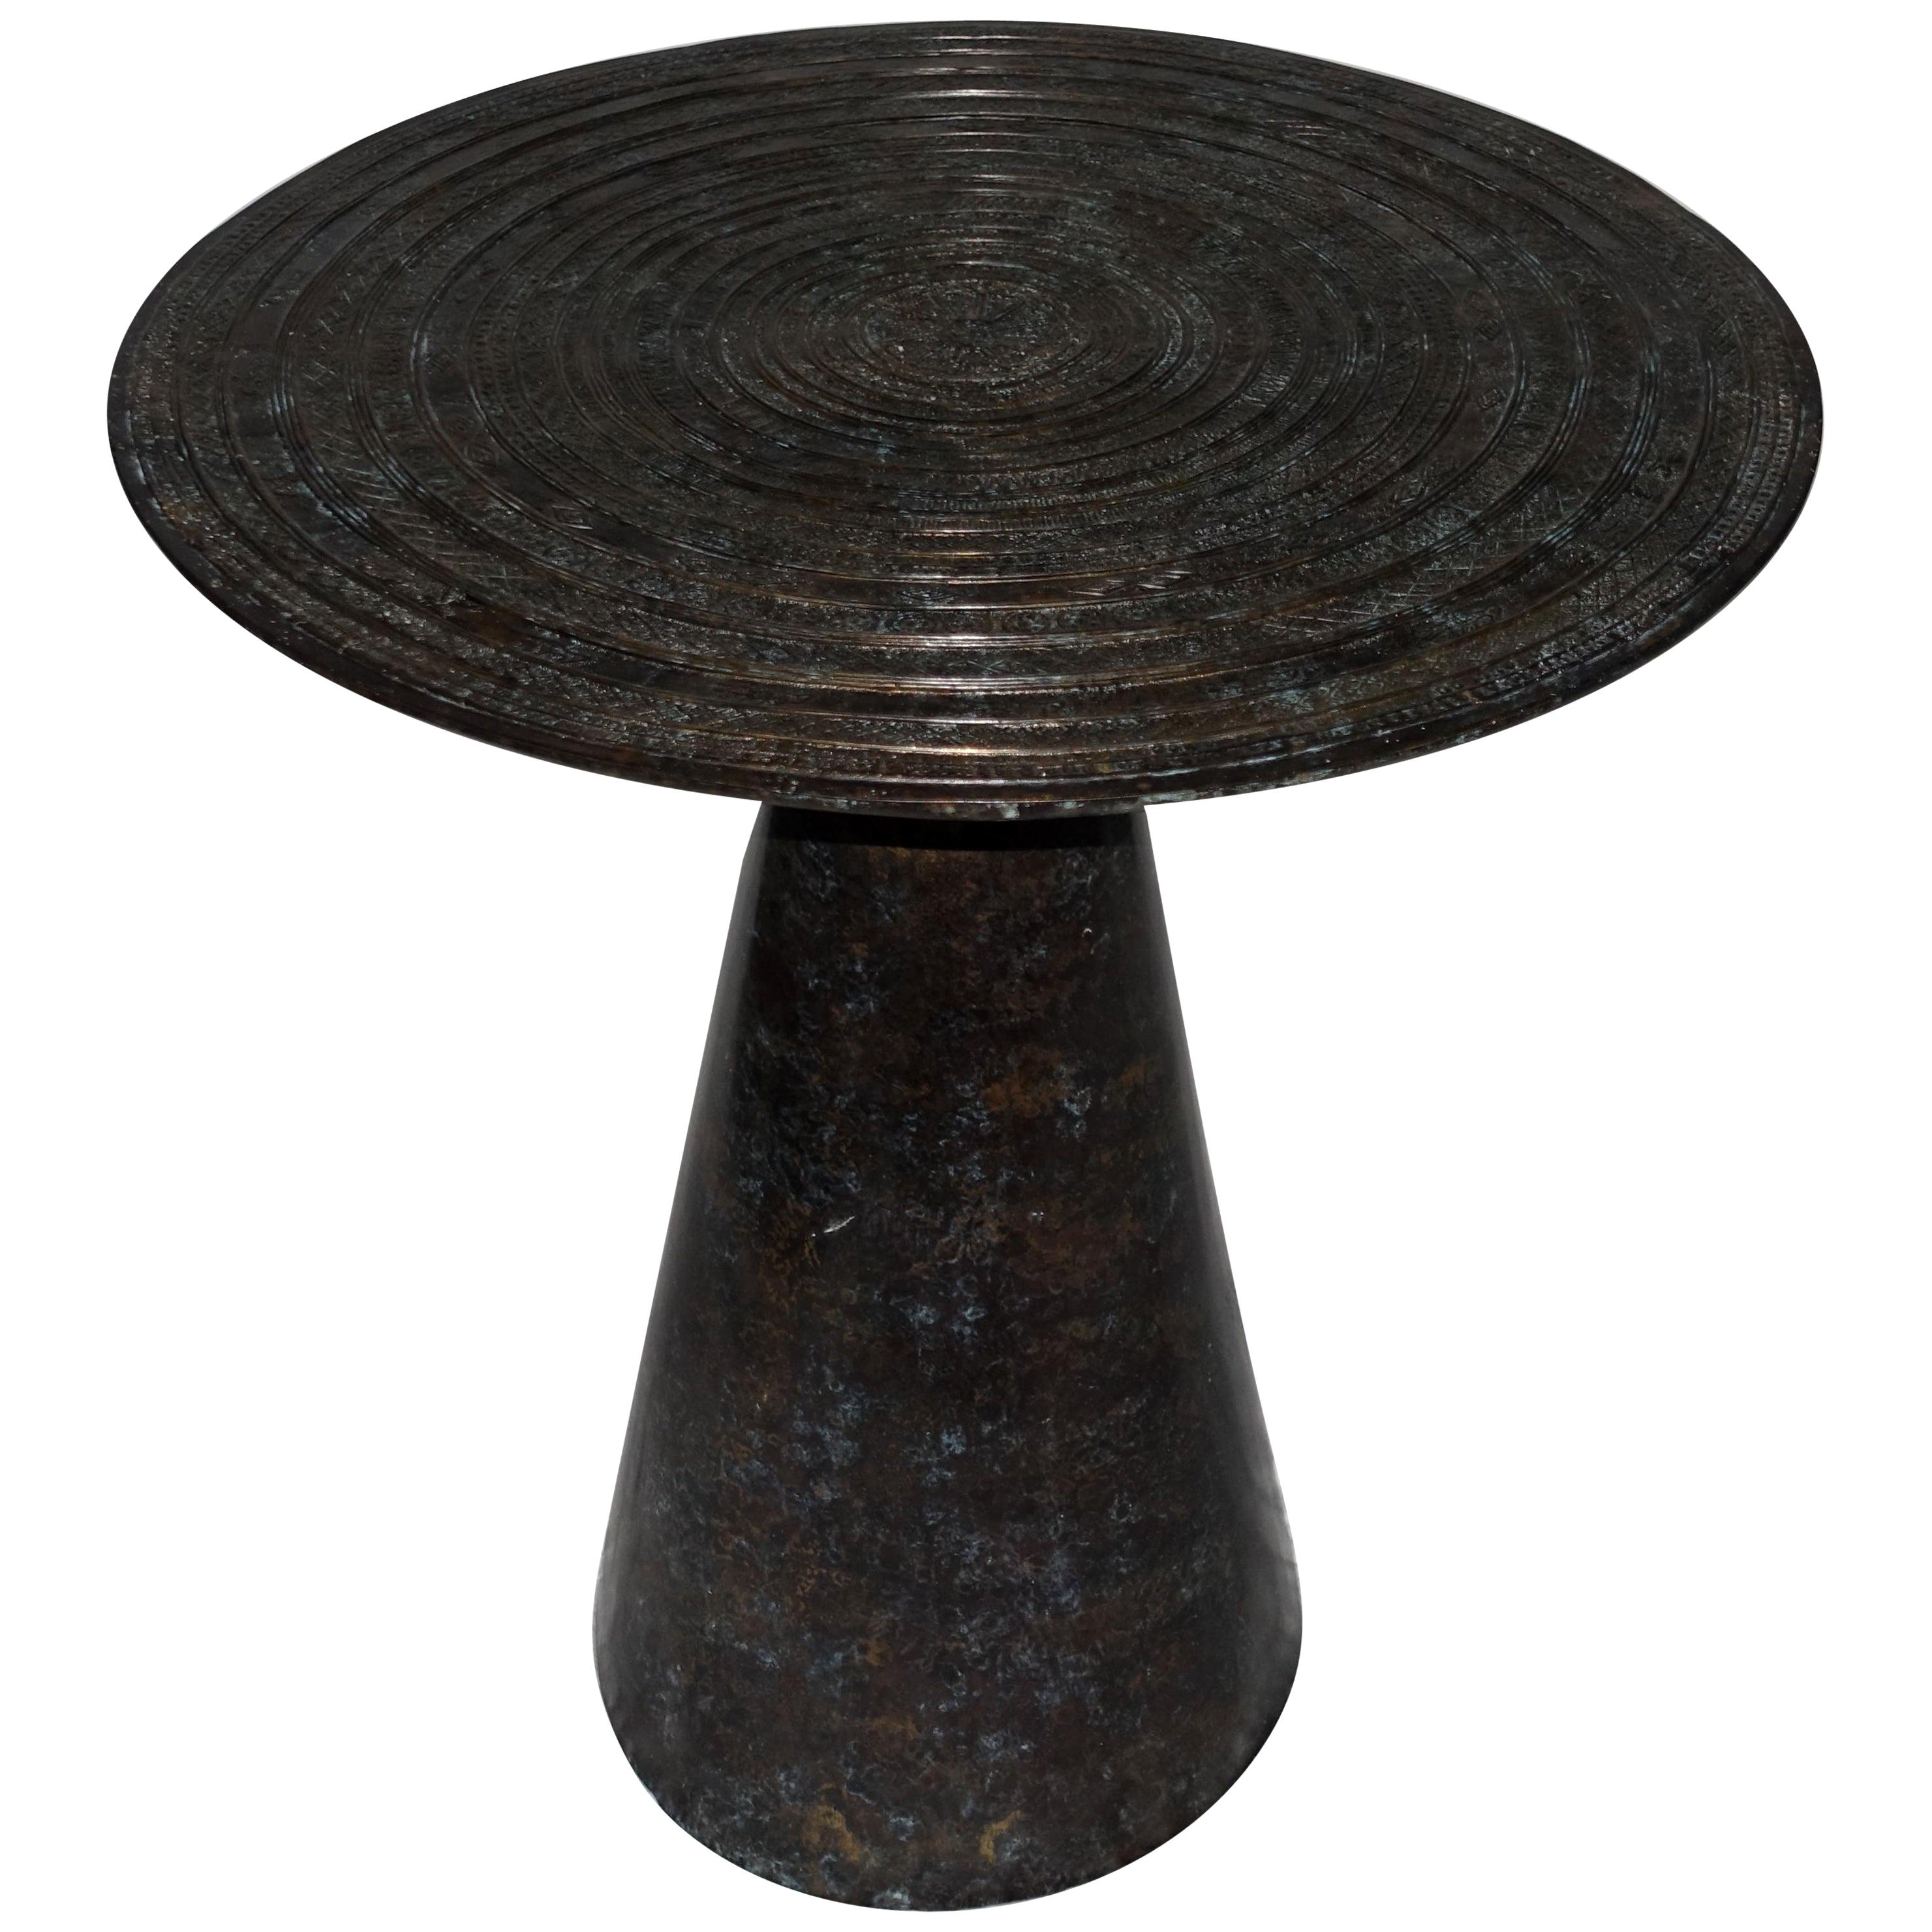 Contemporary German bronze round side table.
Round bronze side table with Cambodian chieftain's drum design.  


 